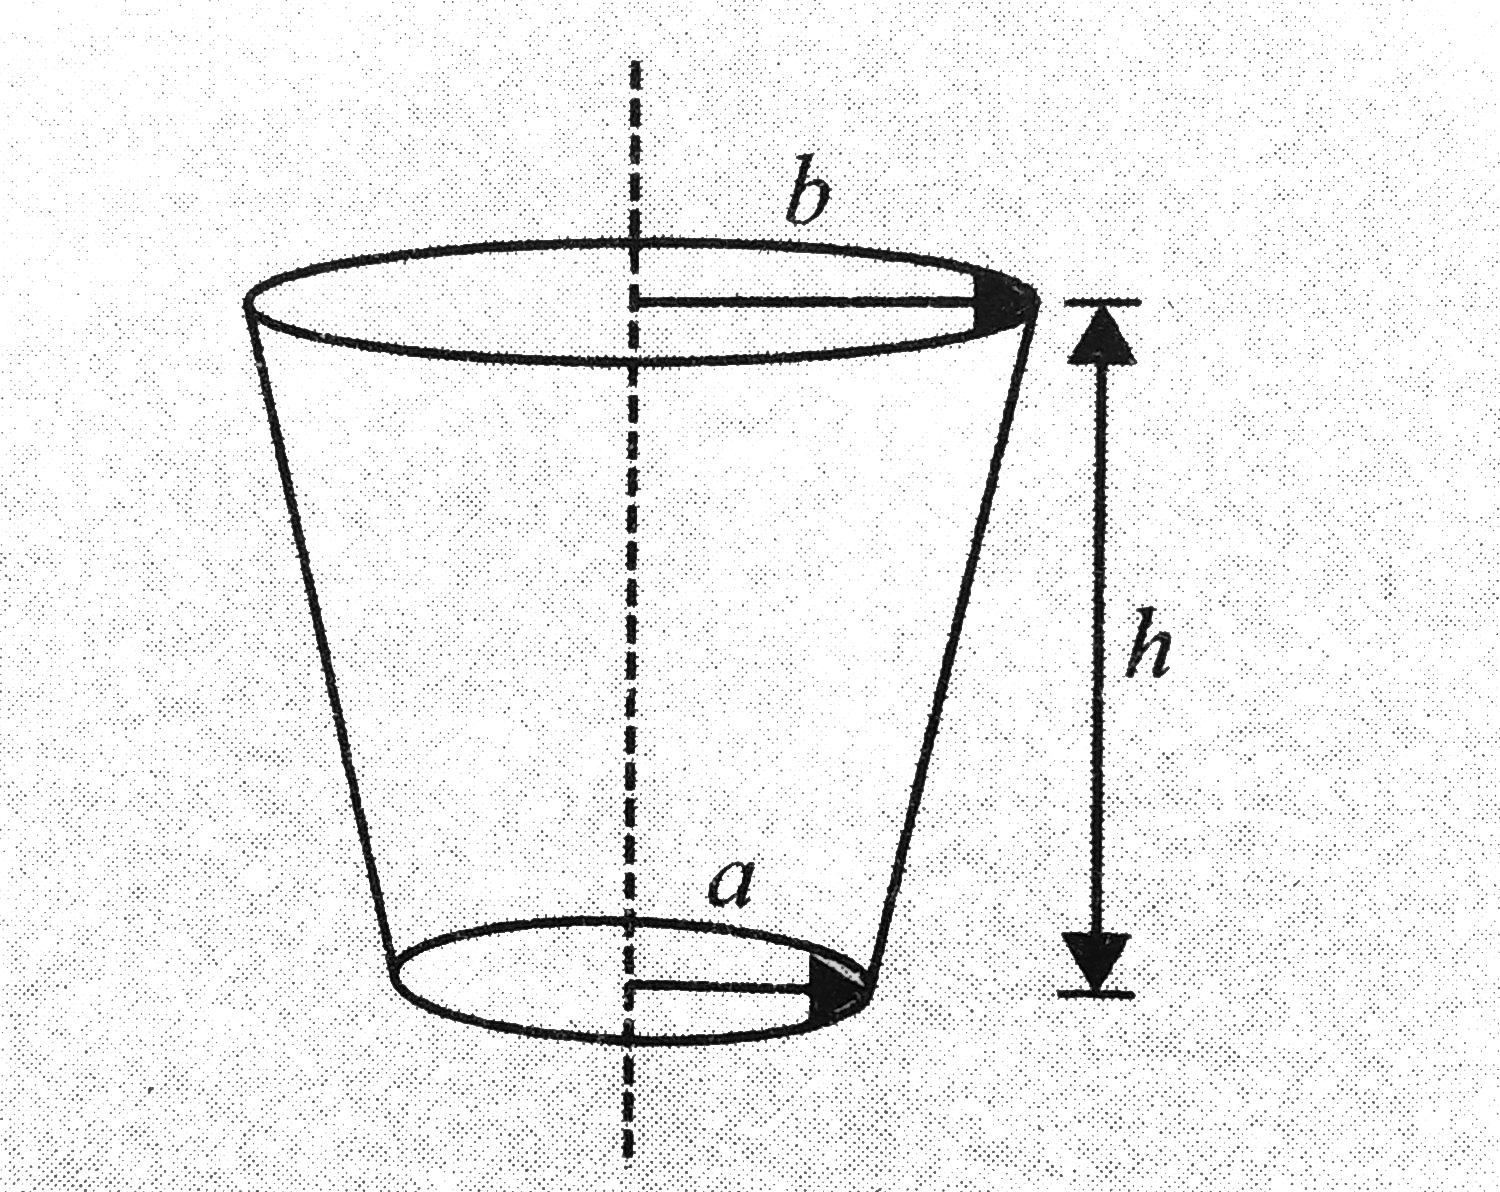 Find the net downward thrust on the clined surface of a bucket full of water of height h and radii a and b.